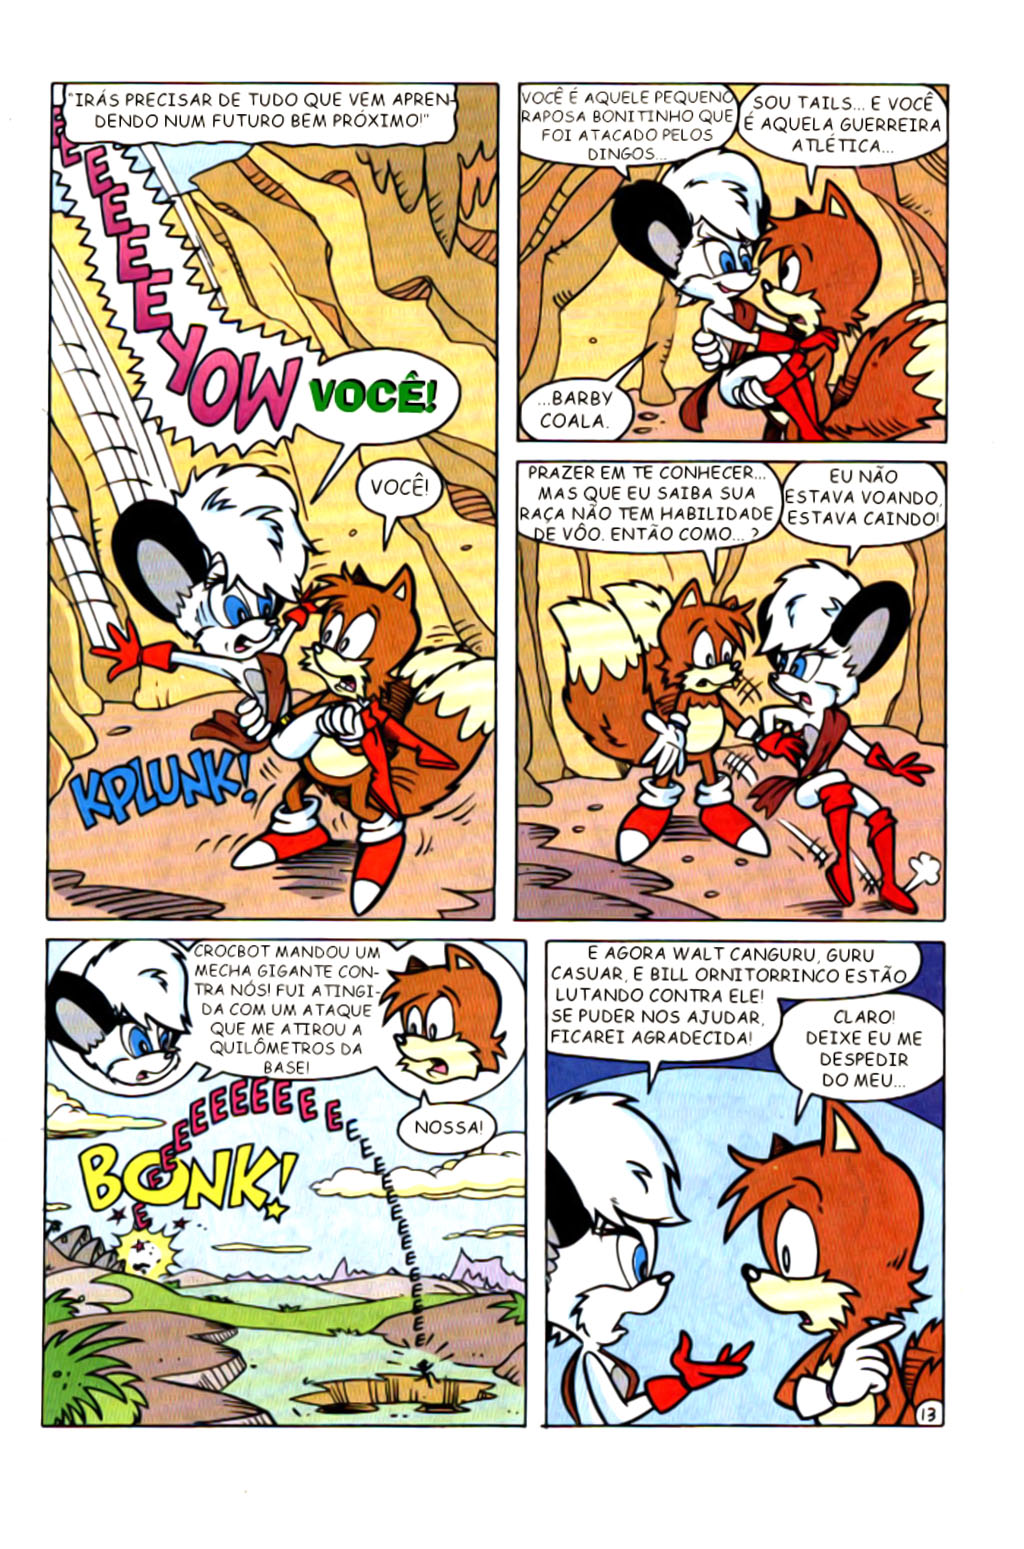 Sonic The Hedgehog Archie Comics #029D - Tails : Archie Comics : Free  Download, Borrow, and Streaming : Internet Archive